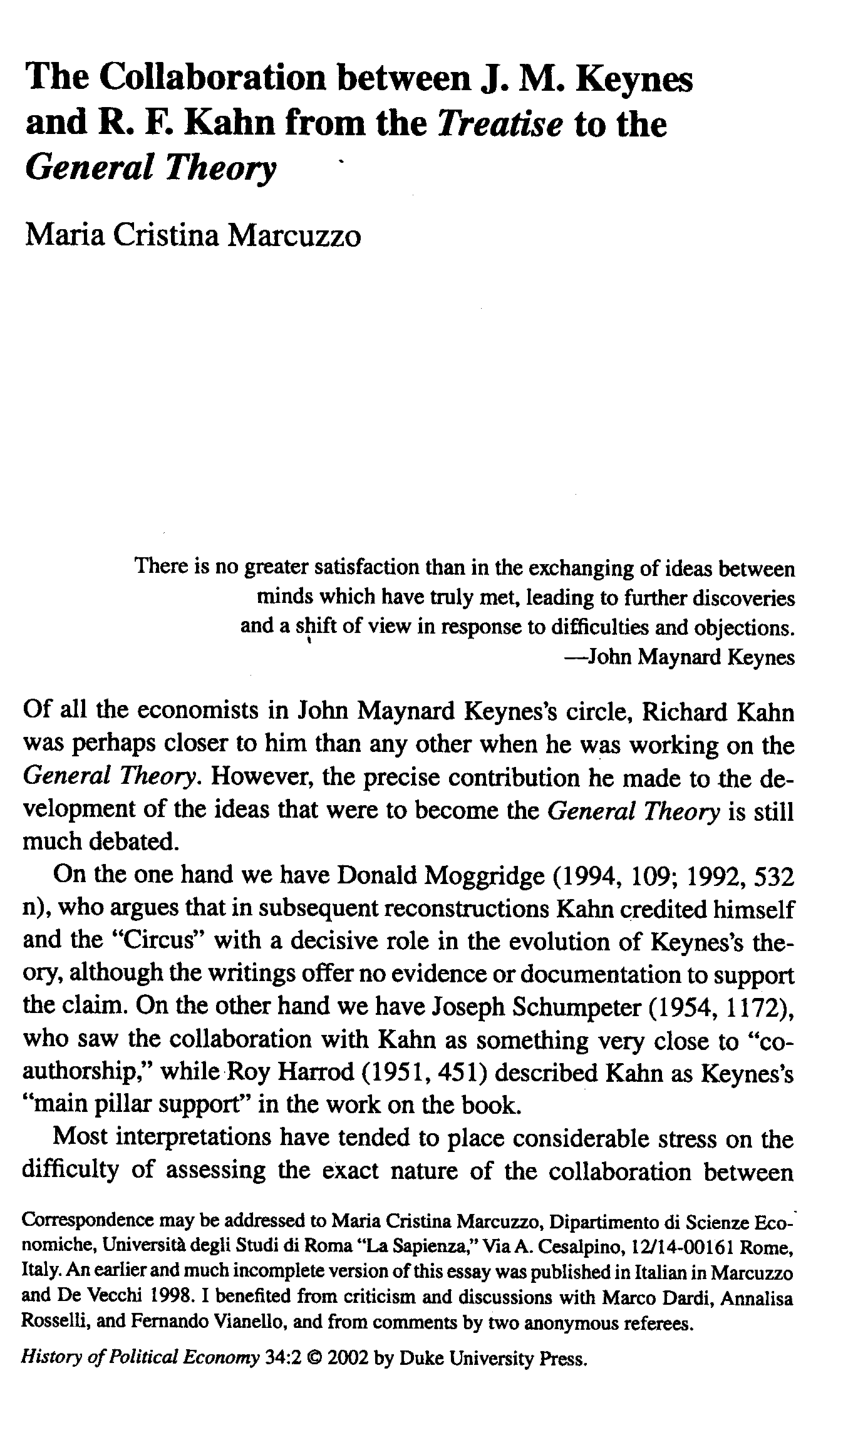 Pdf The Collaboration Between J M Keynes And R F Kahn From The Treatise To The General Theory